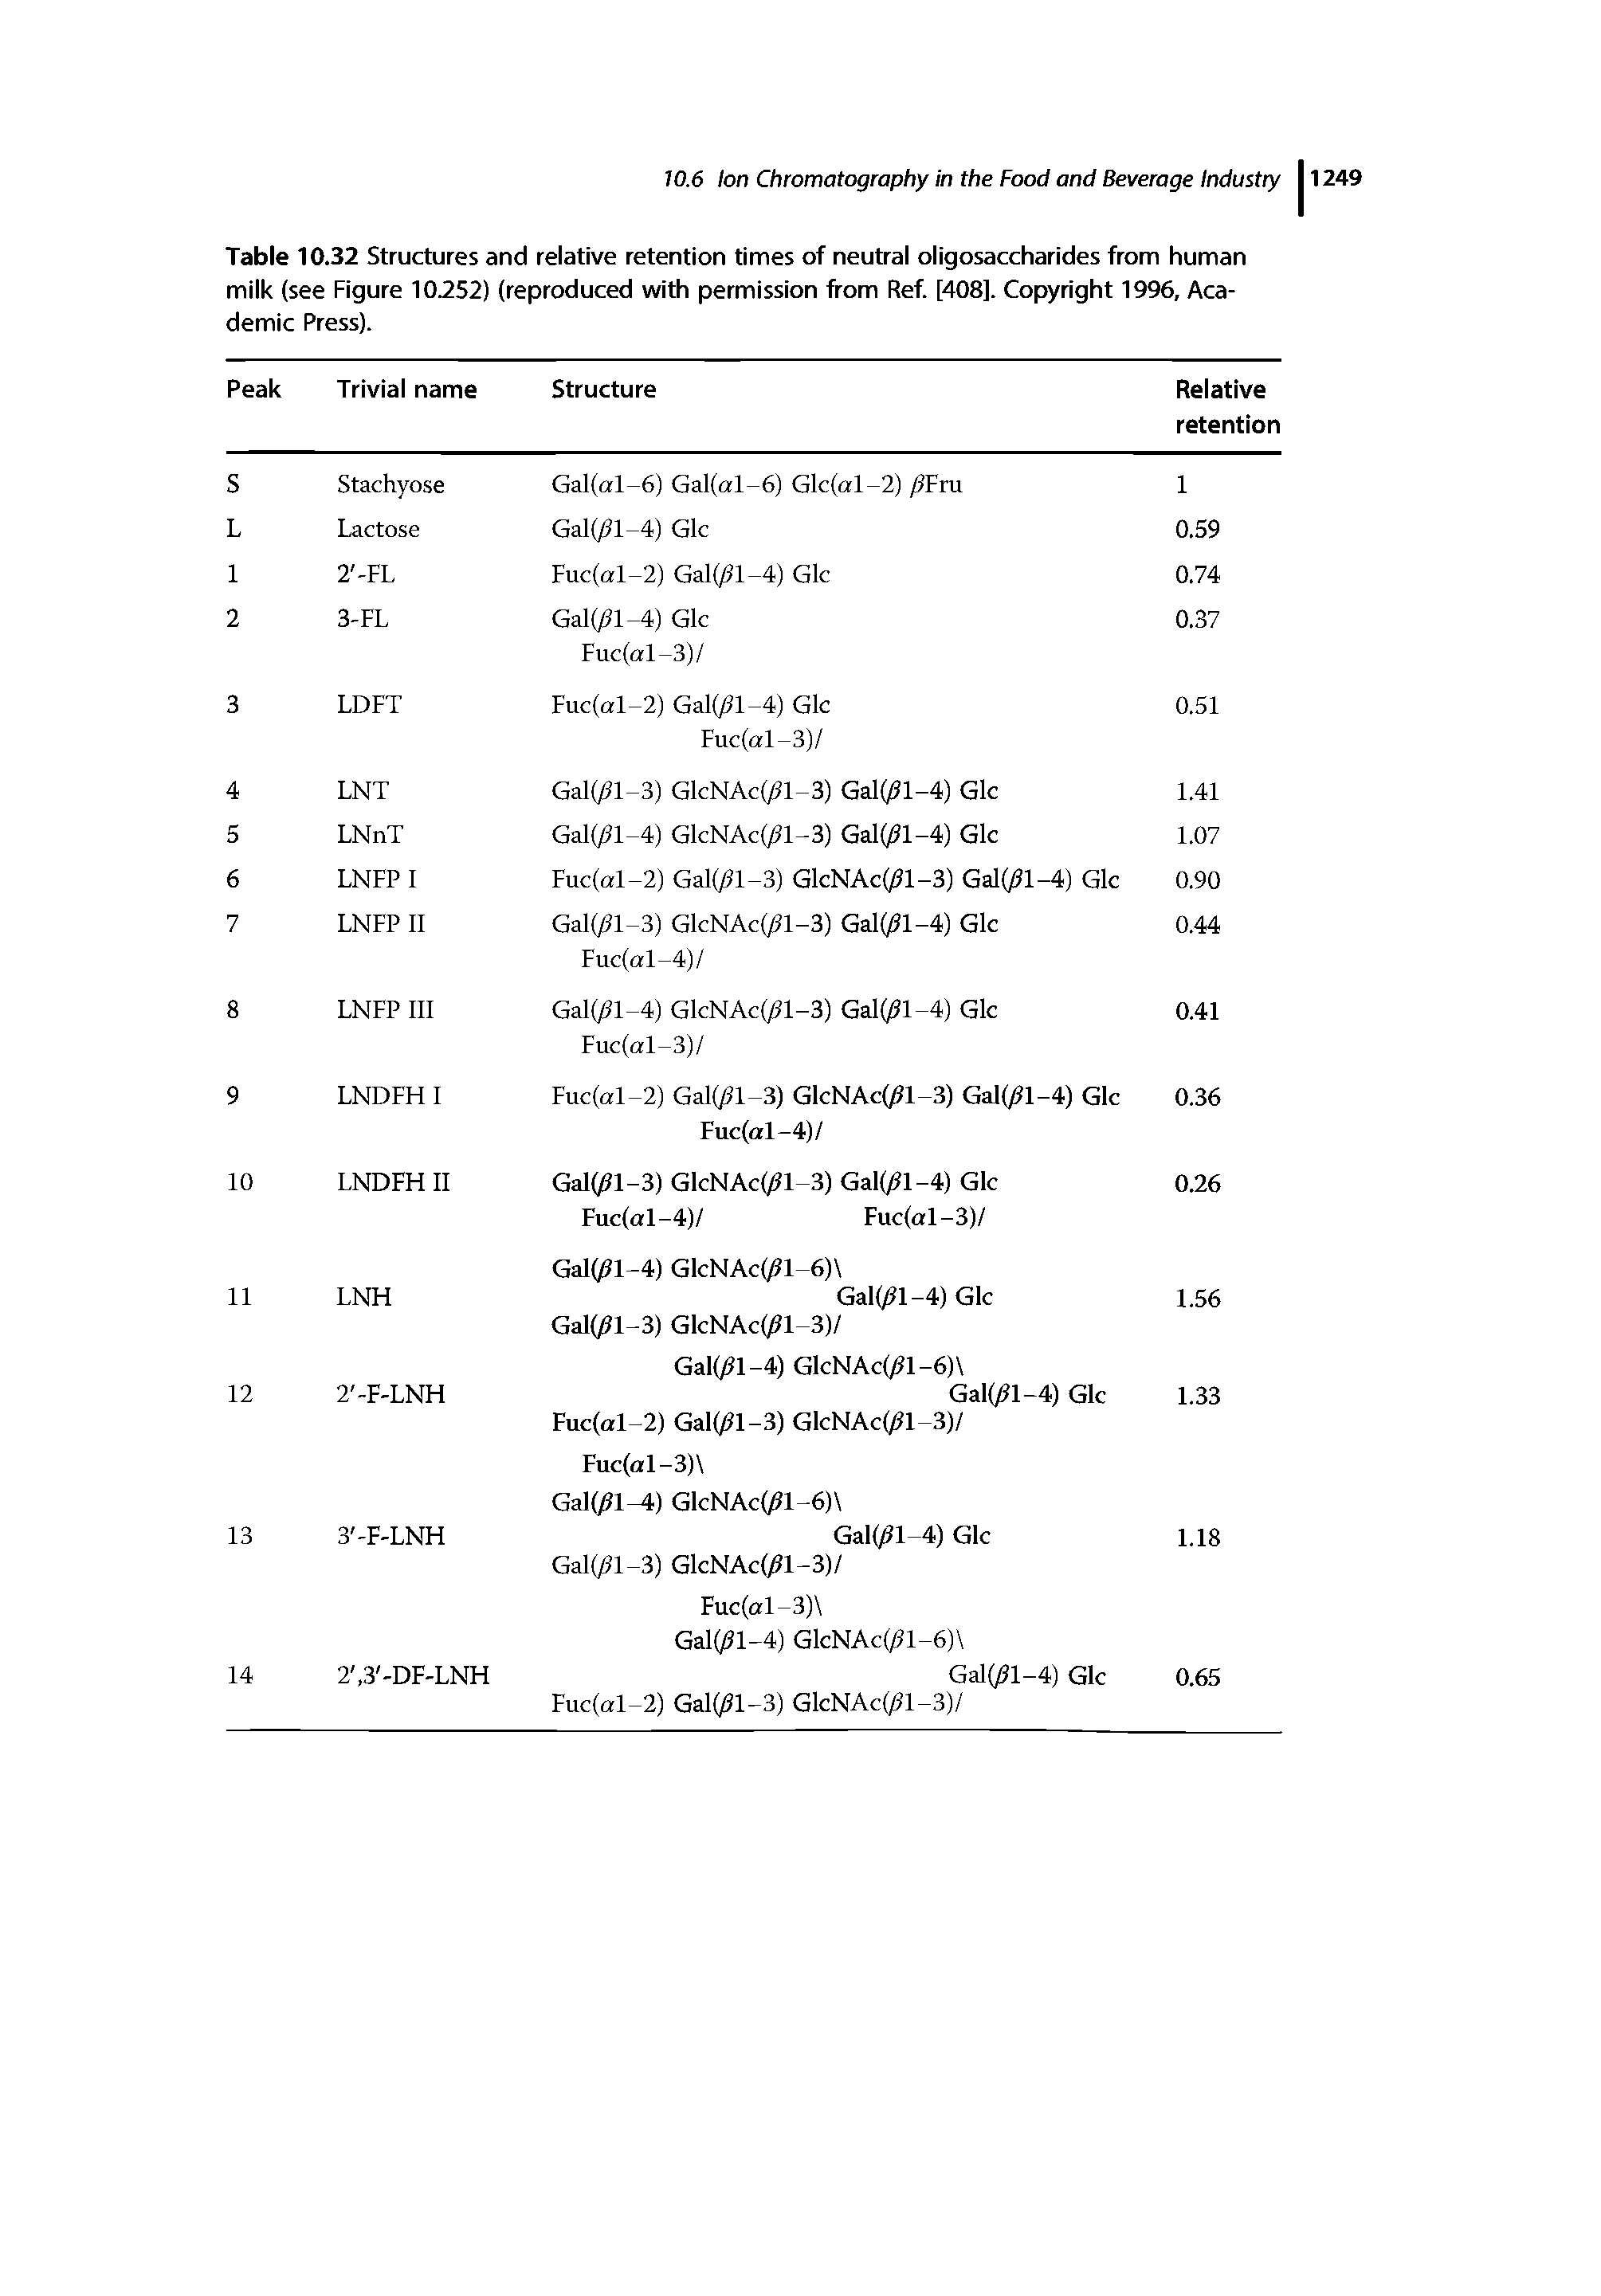 Table 10.32 Structures and relative retention times of neutral oligosaccharides from human milk (see Figure 10.252) (reproduced with permission from Ref. [408]. Copyright 1996, Academic Press).